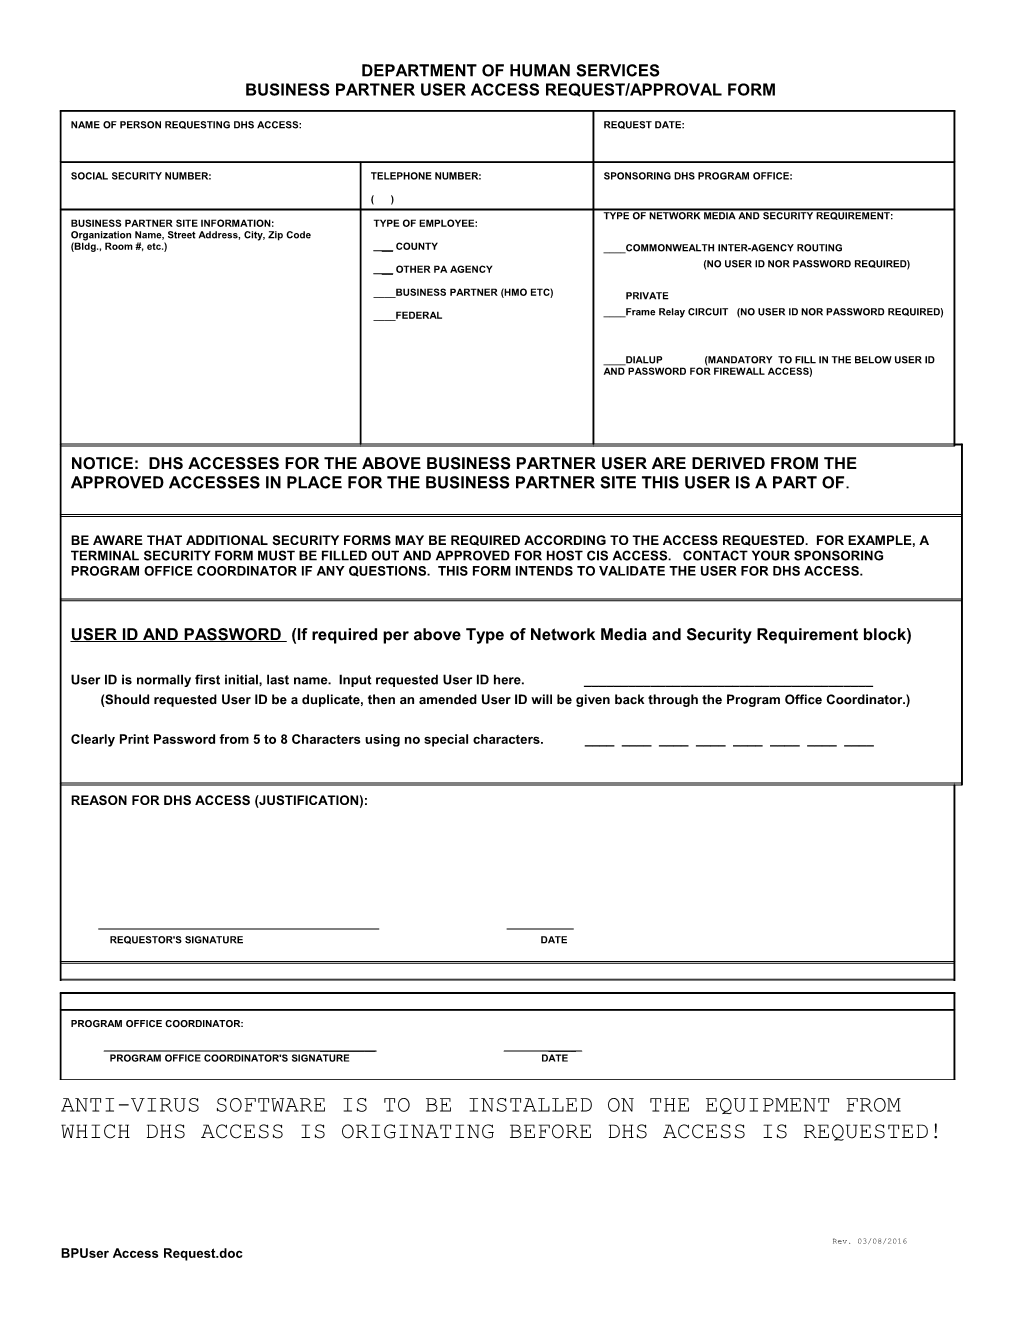 Business Partner User Access Request - Approval Form